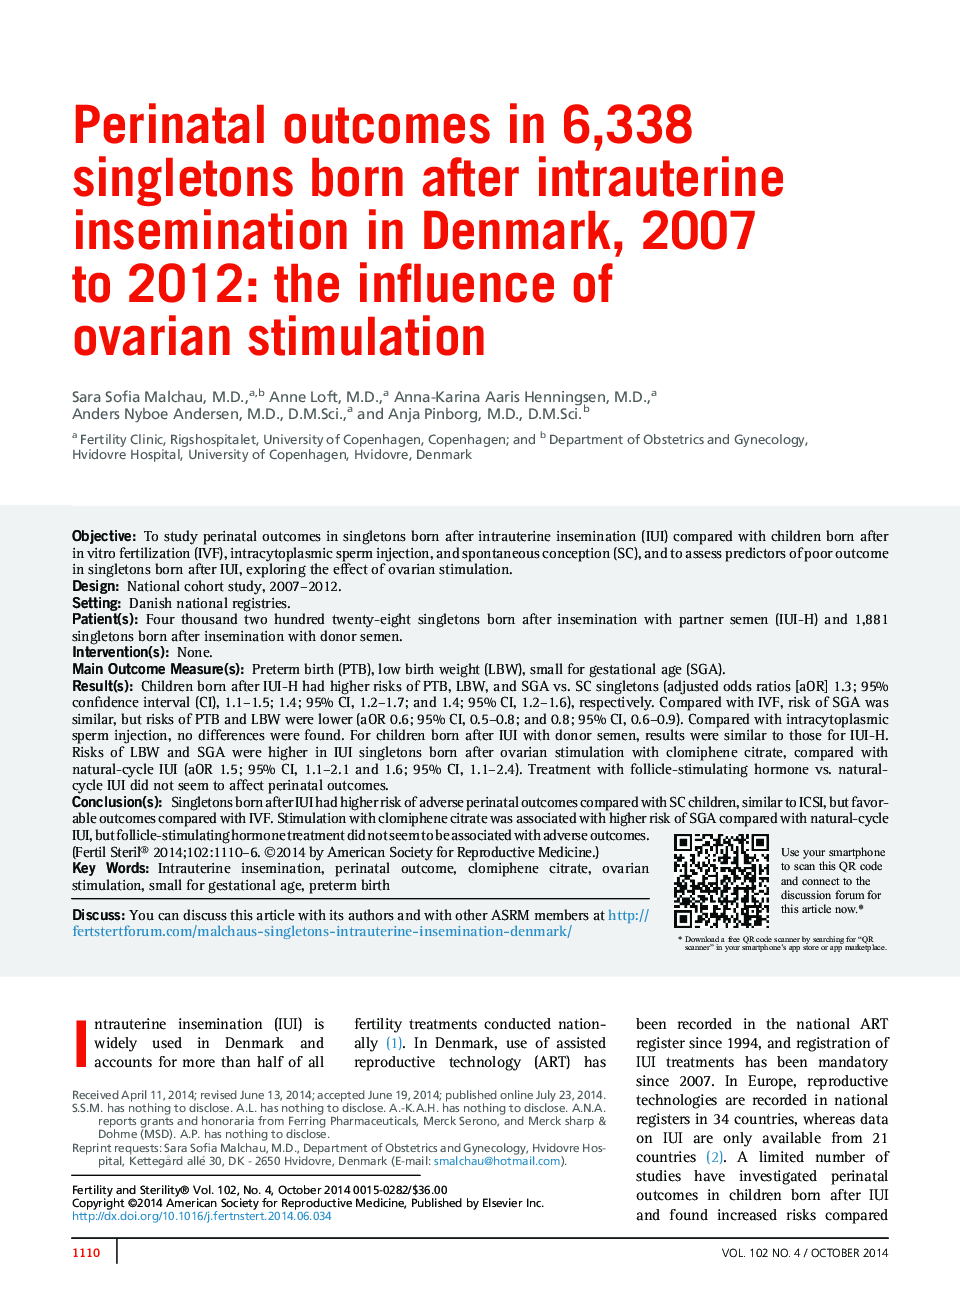 Perinatal outcomes in 6,338 singletons born after intrauterine insemination in Denmark, 2007 toÂ 2012: the influence of ovarian stimulation